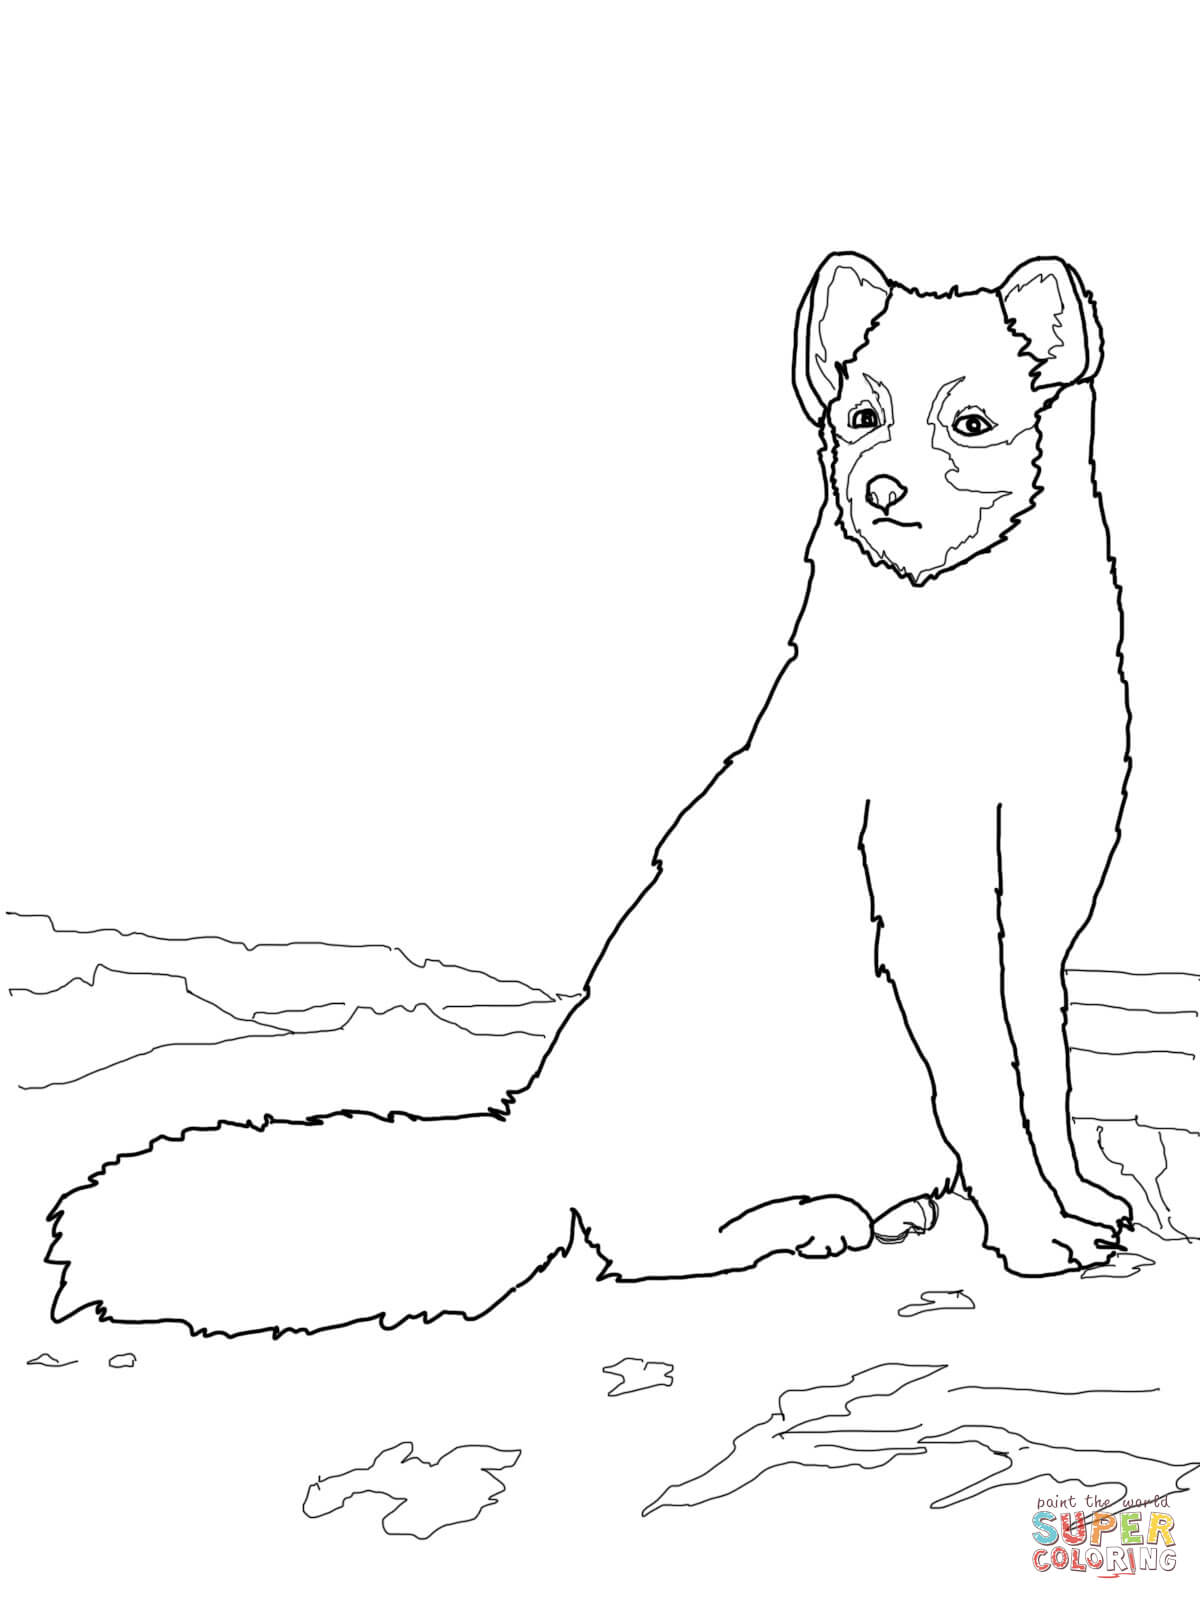 Sitting arctic fox coloring page free printable coloring pages